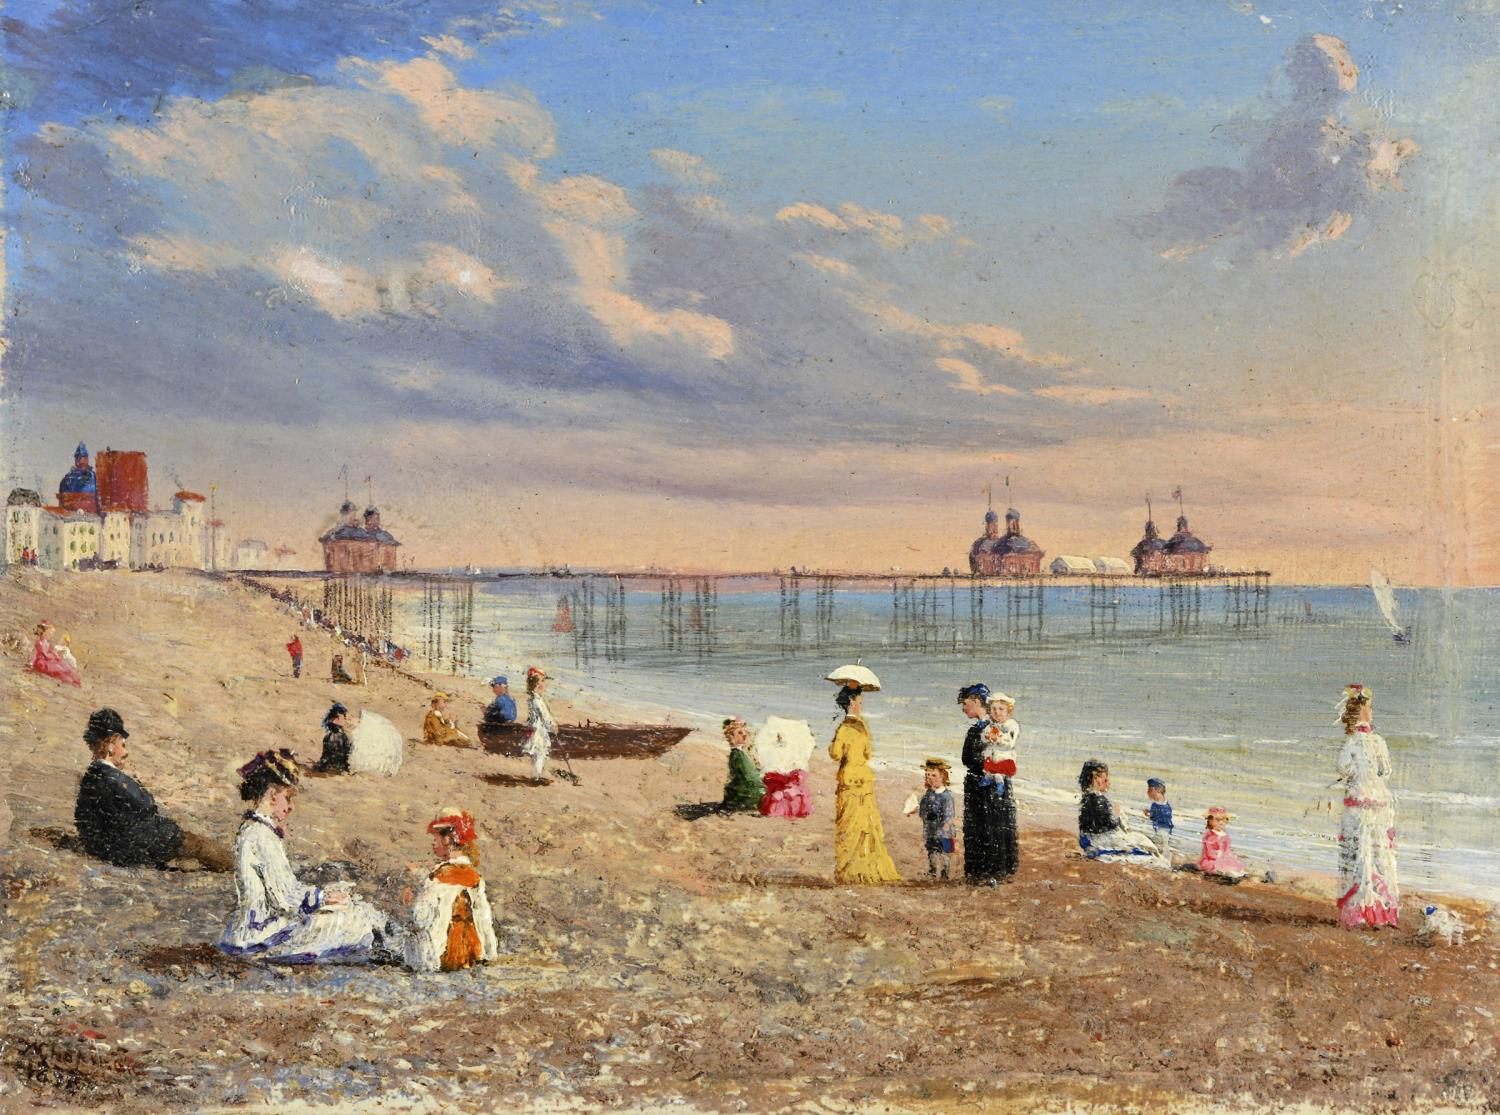 CONRAD WISE CHAPMAN (American, 1842-1910) ELEGANT FIGURES AT THE BEACH (TROUVILLE?) A near pair,